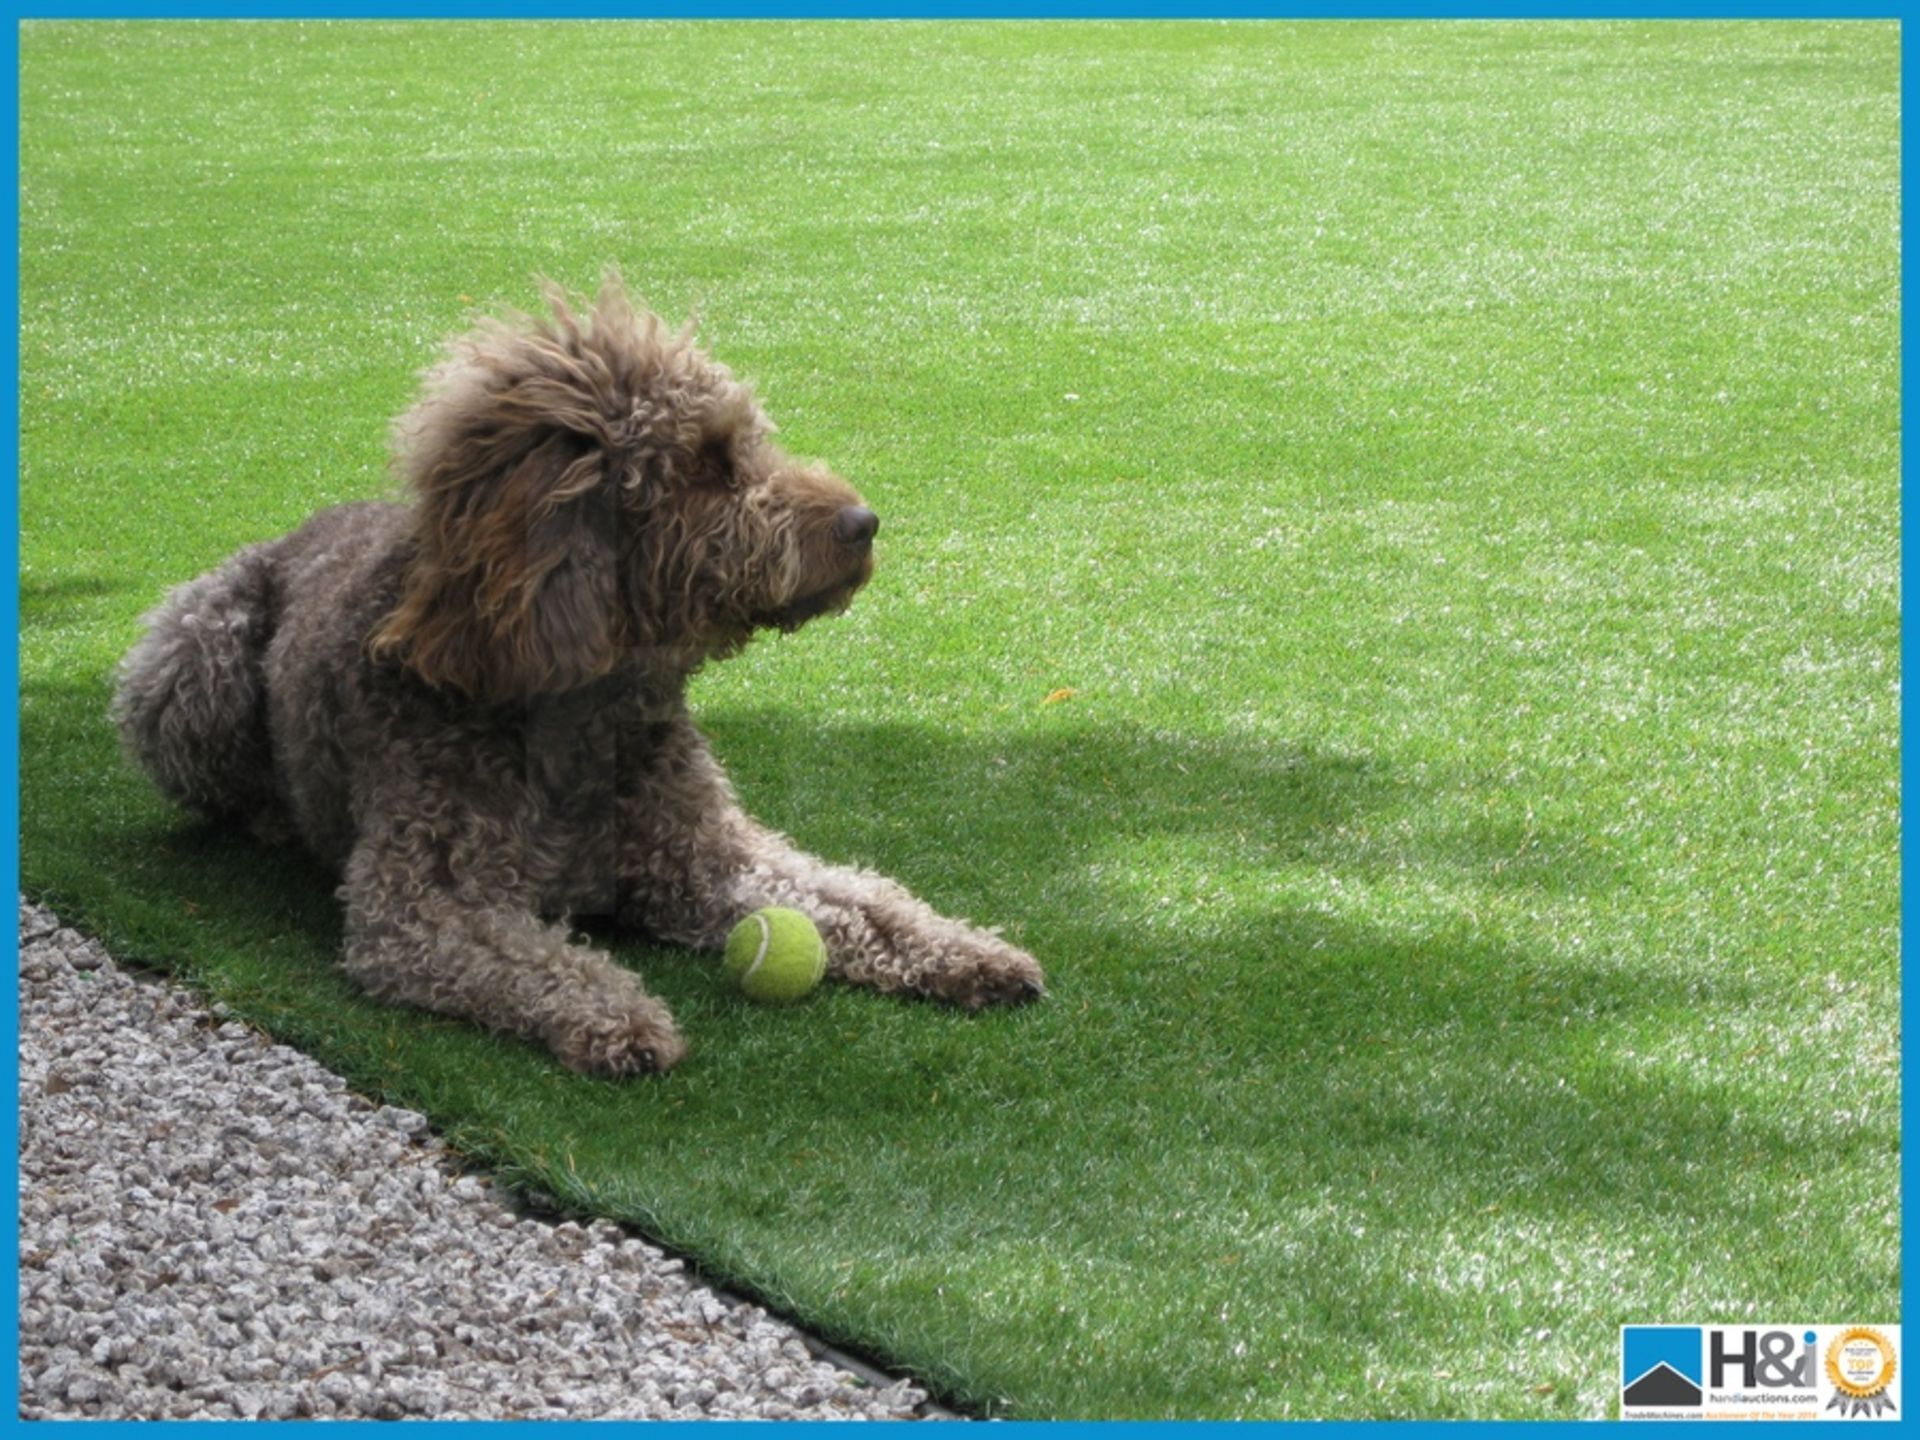 Ultra high-quality 'County' artificial grass. Useage applications, commercial and domestic, - Image 3 of 4